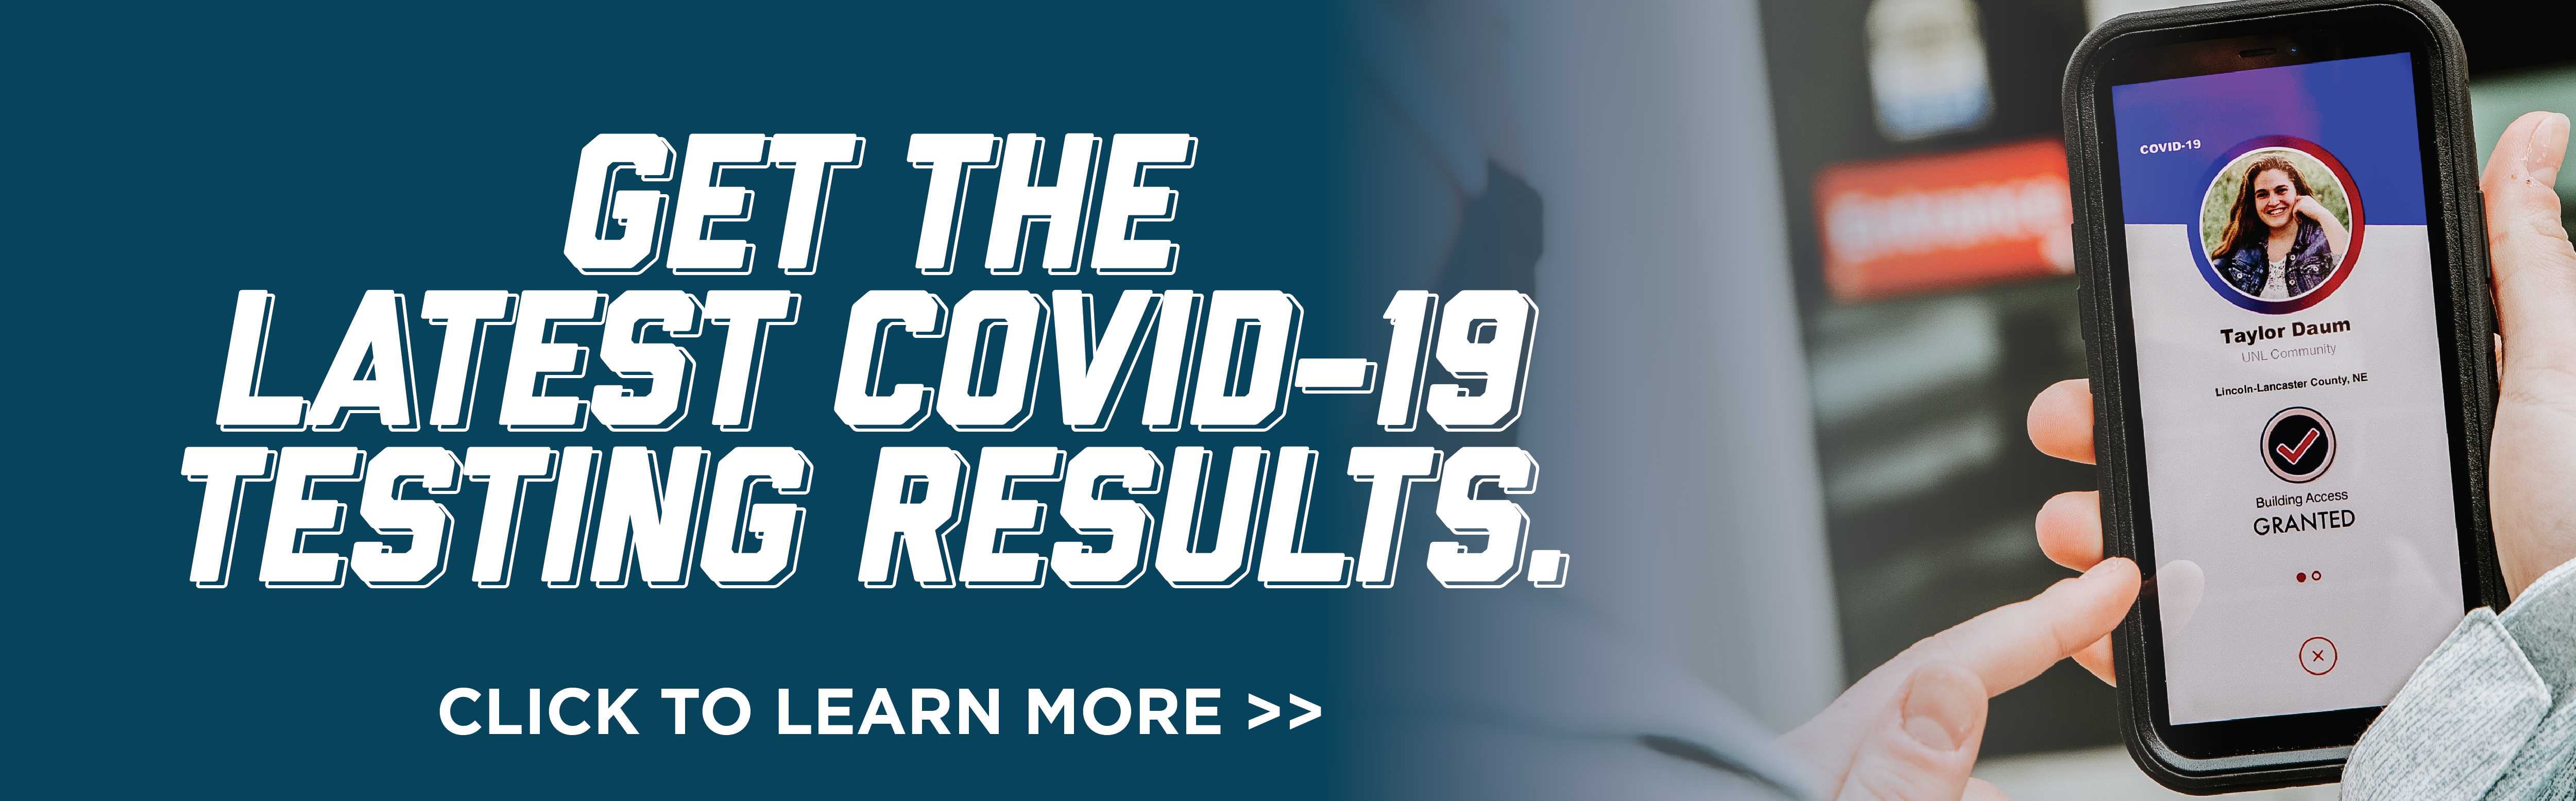 Get the latest COVID-19 Testing Results. Click to learn more.